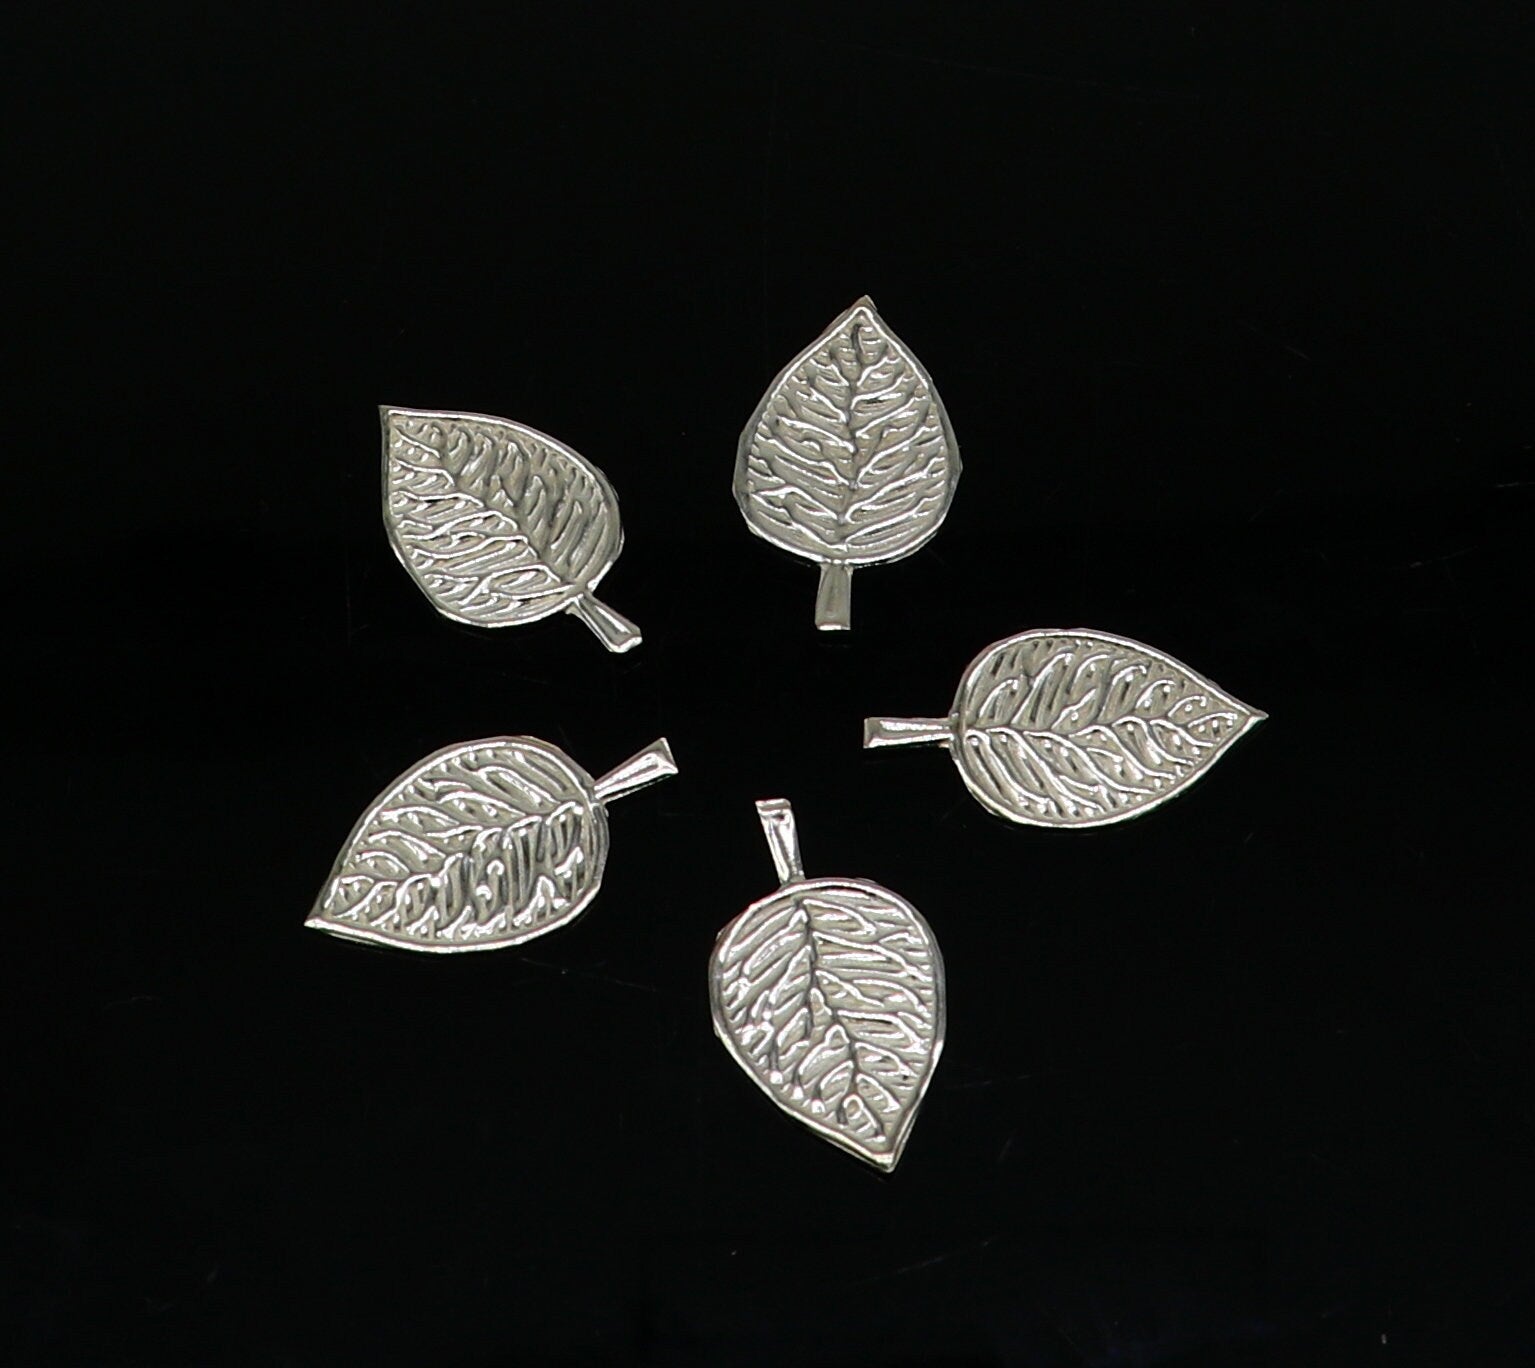 2.5cm 925 sterling silver handmade small betel leaf Paan leaf for worshipping offered to Lord Vishnu, Goddesses Laxmi and Lord Ganesh su1103 - TRIBAL ORNAMENTS